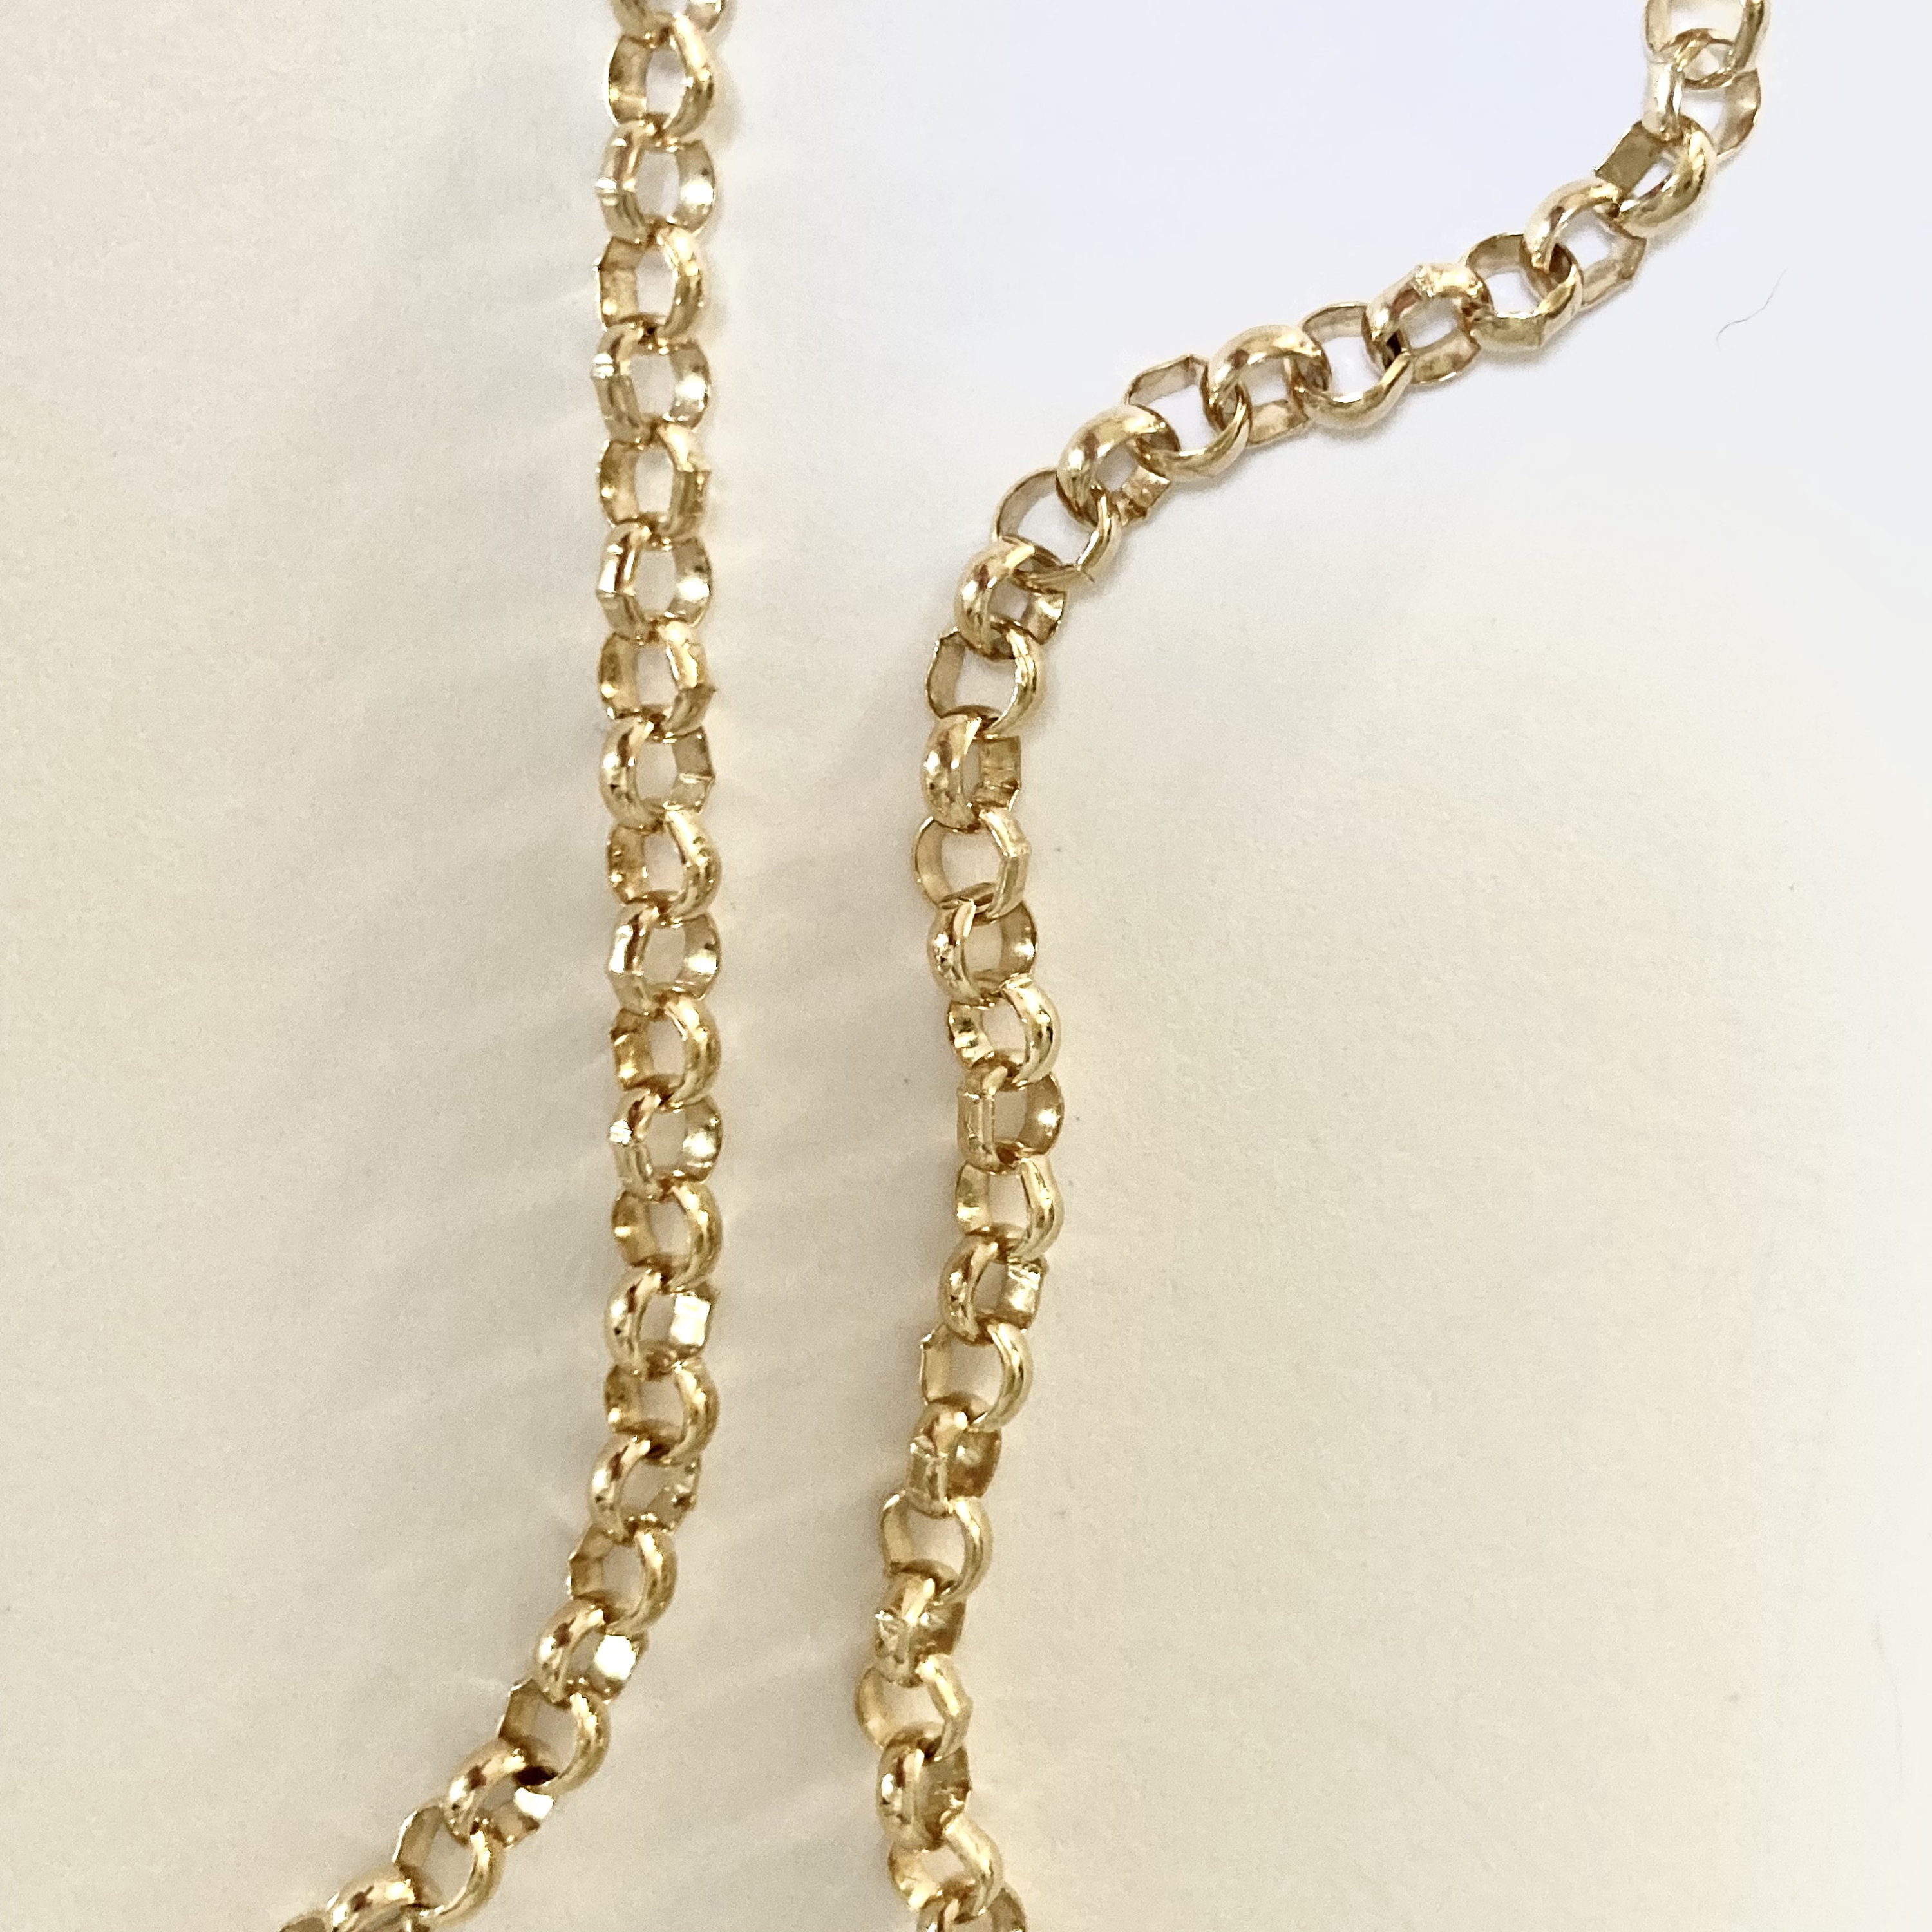 Vintage Very Long Solid Gold Chain Long Guard Chain 9k Gold - Etsy